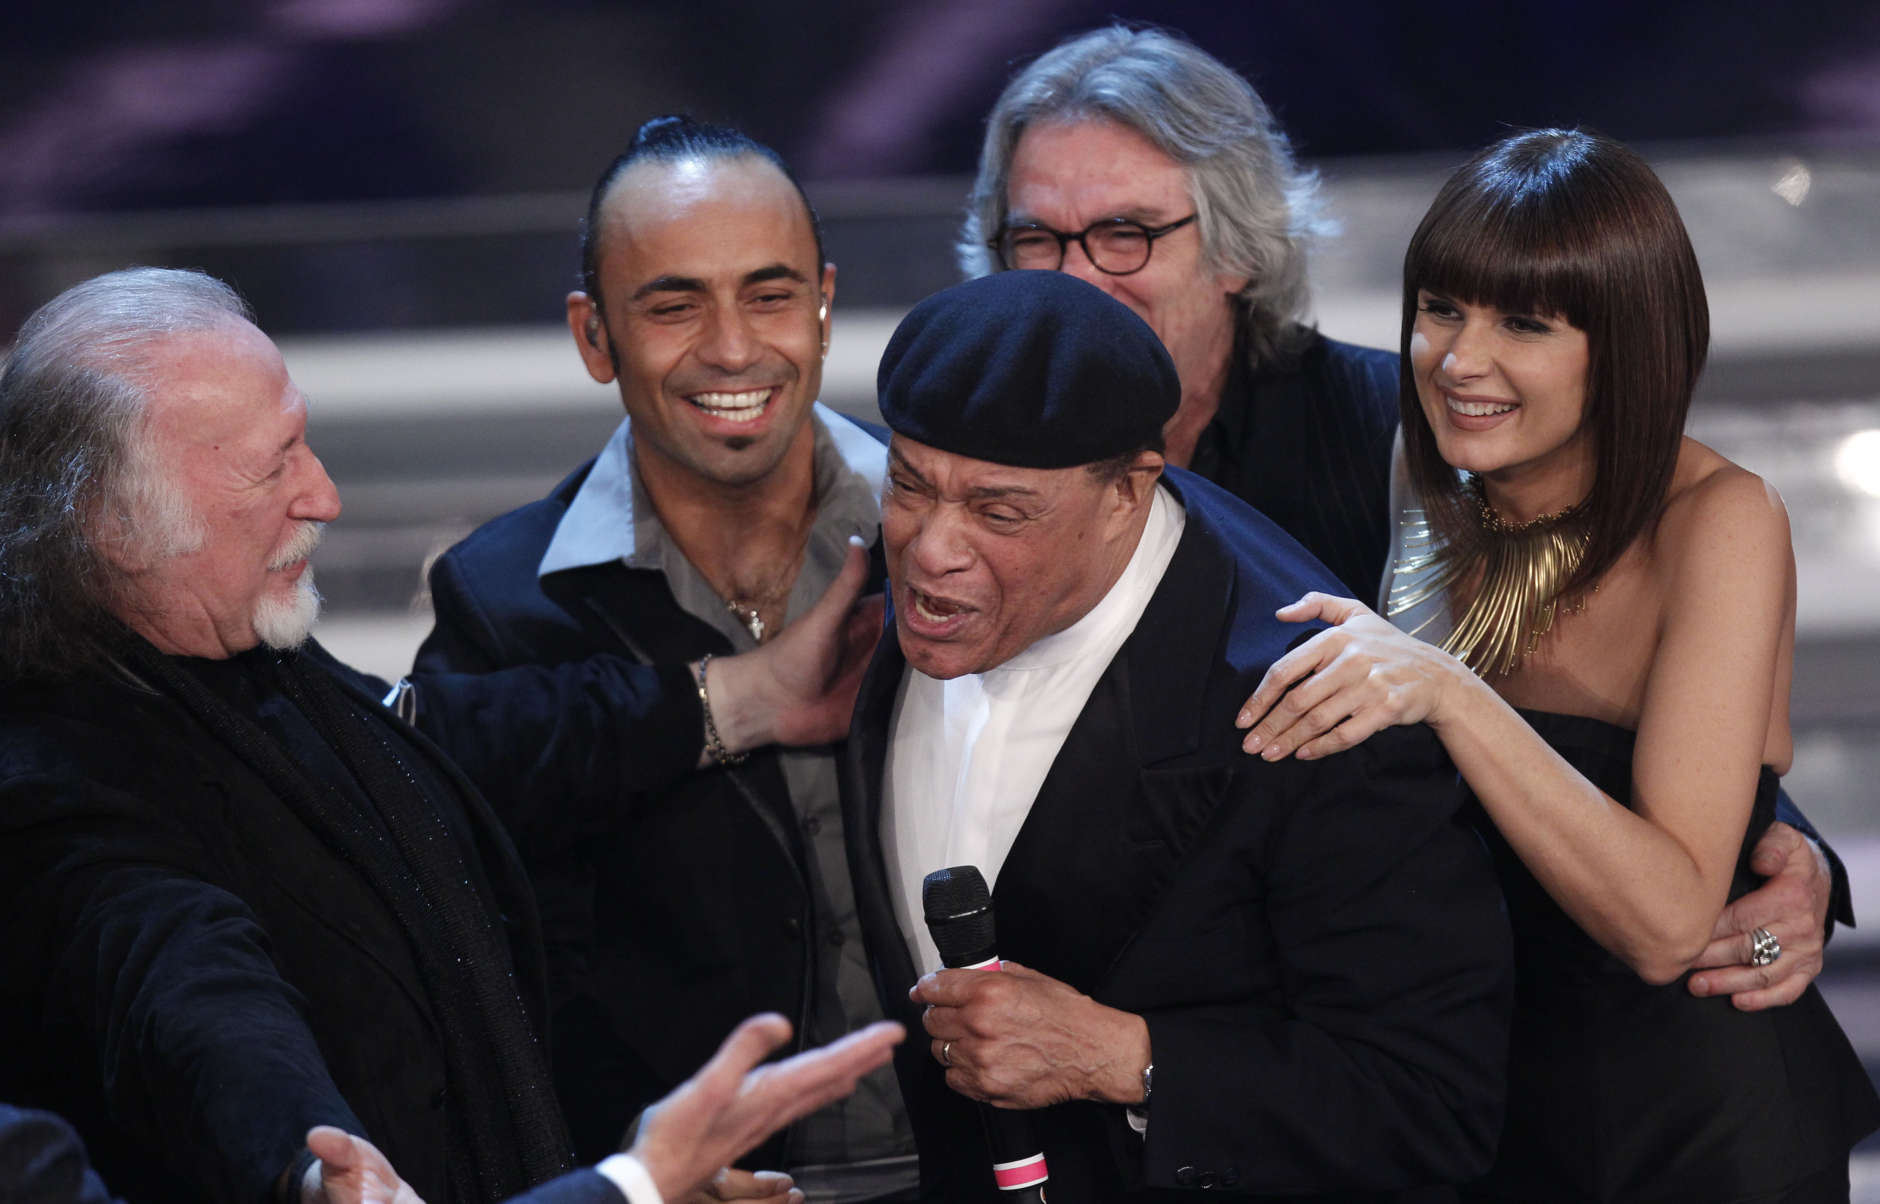 Seven-time Grammy Award winner, US vocalist Al Jarreau performs with Italian  group Matia Bazar during the 62nd edition of the Sanremo Song Festival, in Sanremo, Italy, Thursday, Feb. 16, 2012. (AP Photo/Luca Bruno)